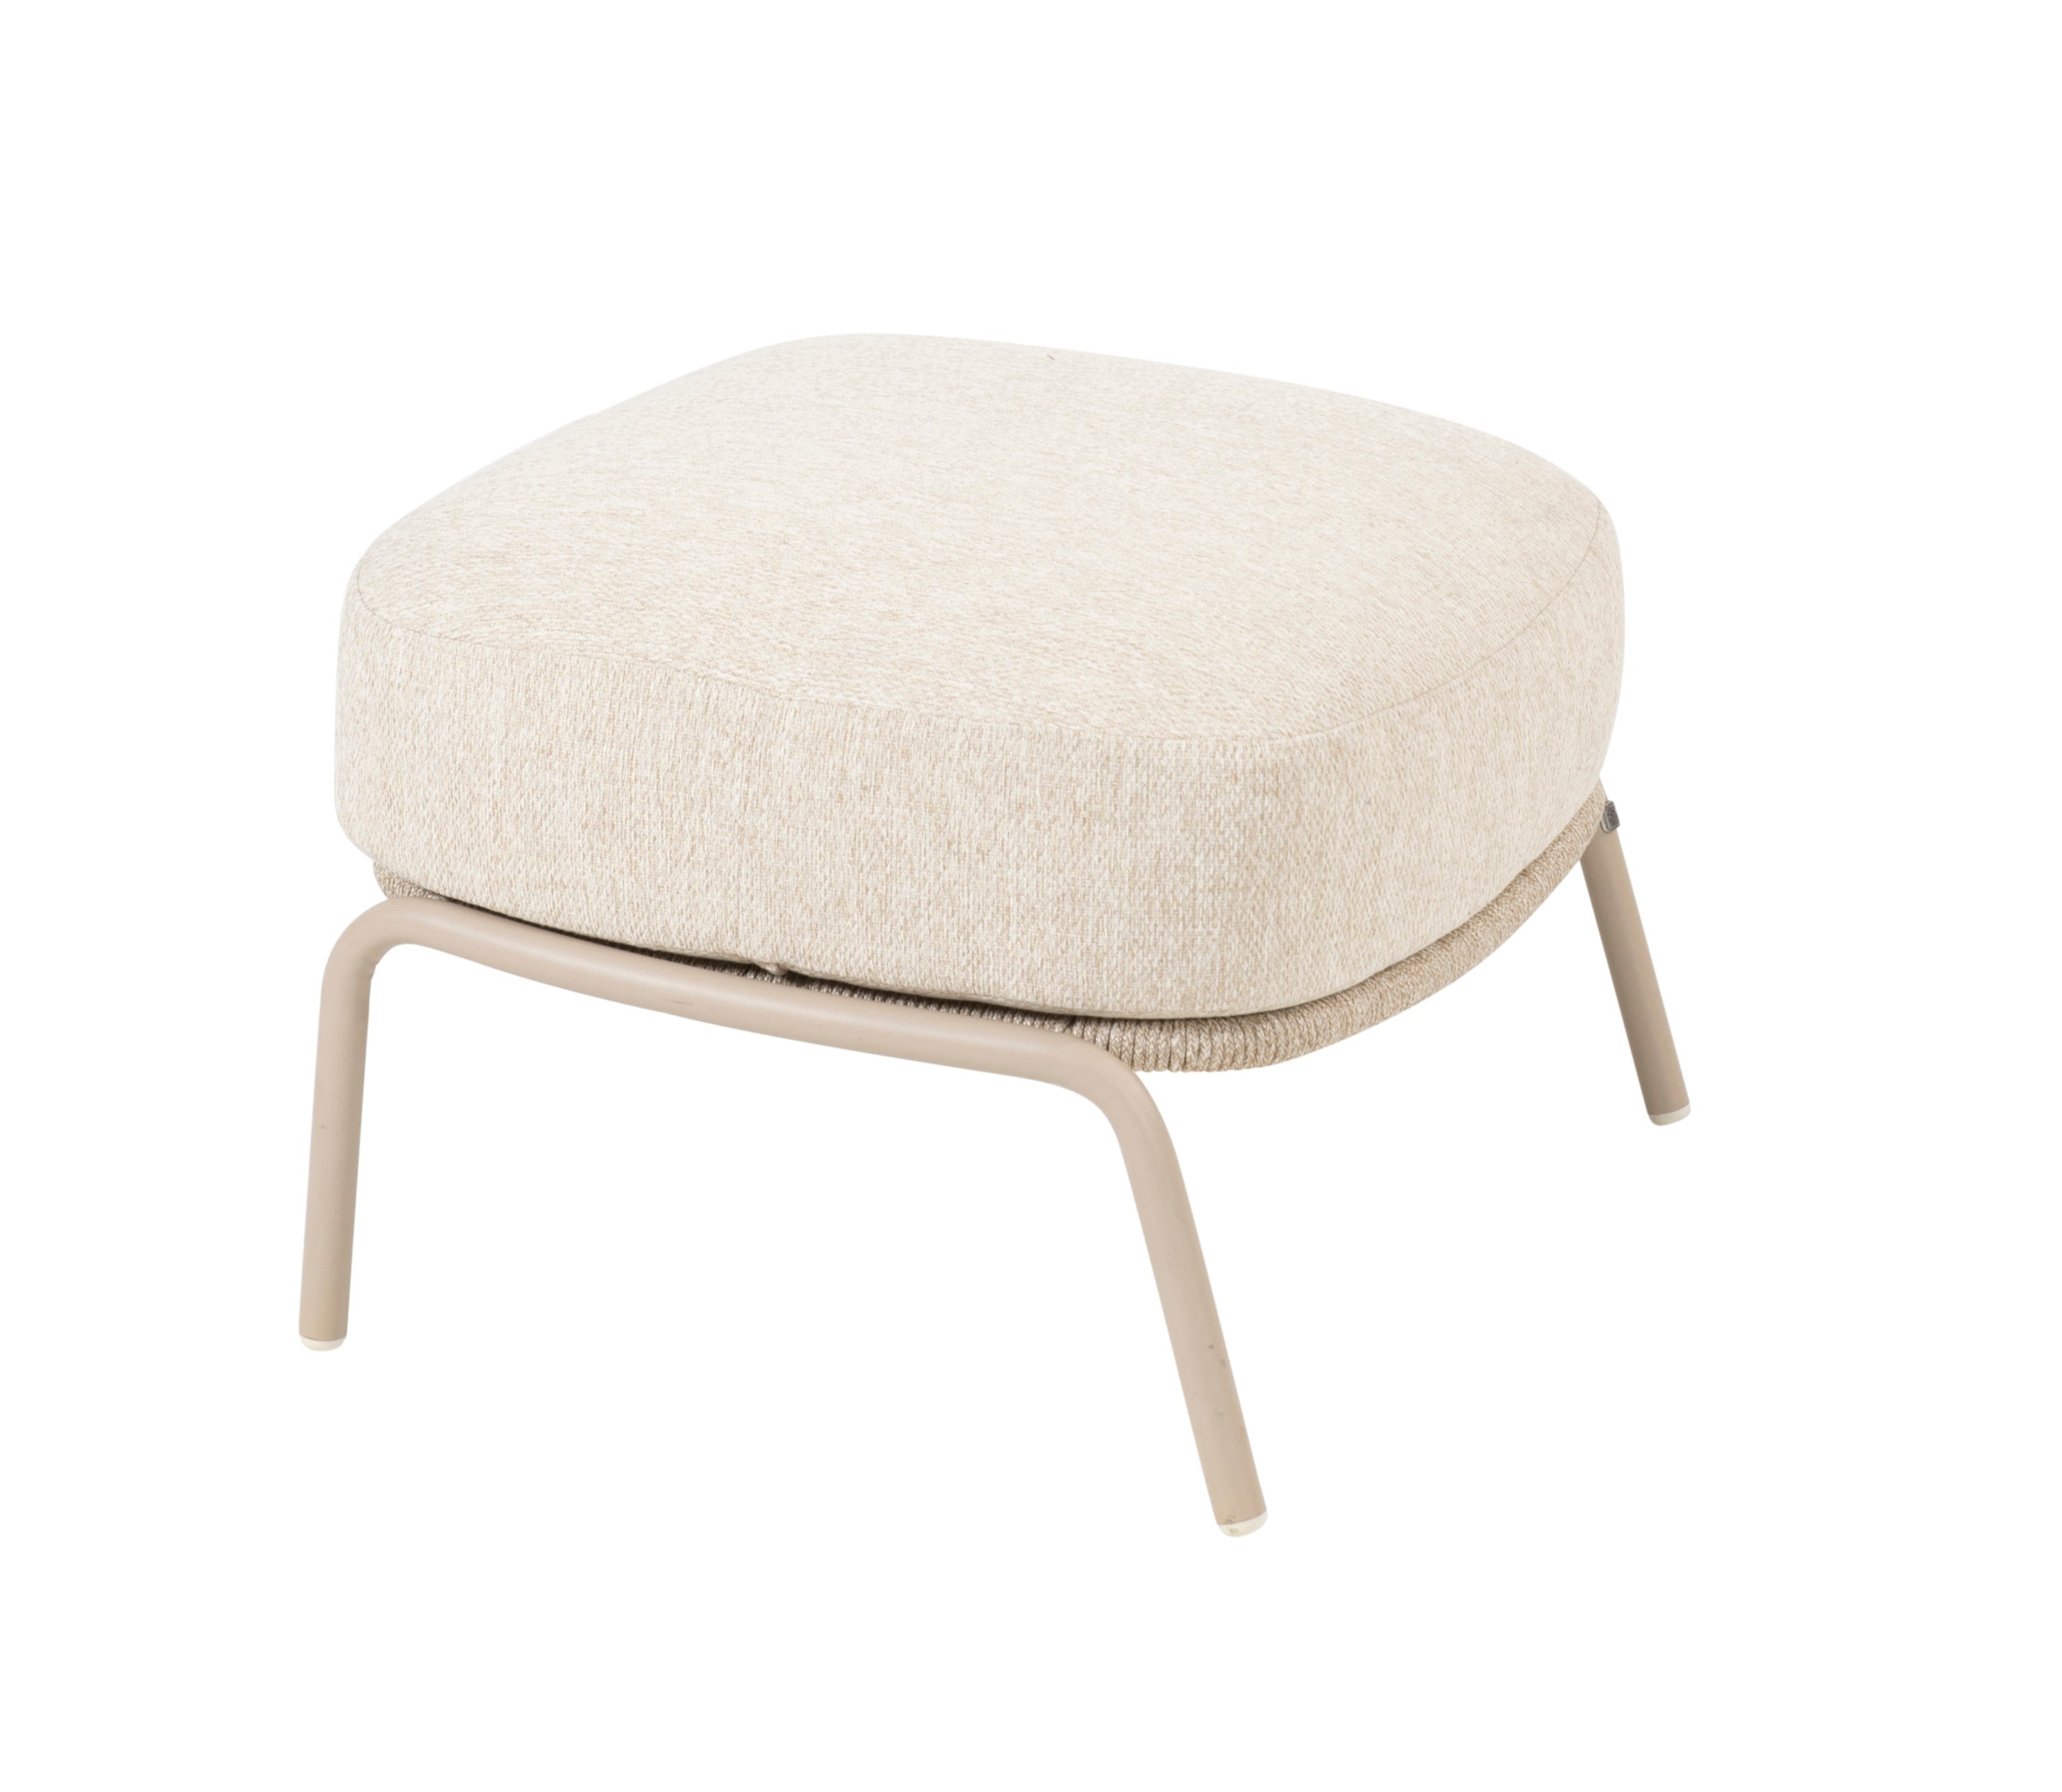 4 Seasons Outdoor Puccini Footstool Latte With Cushion